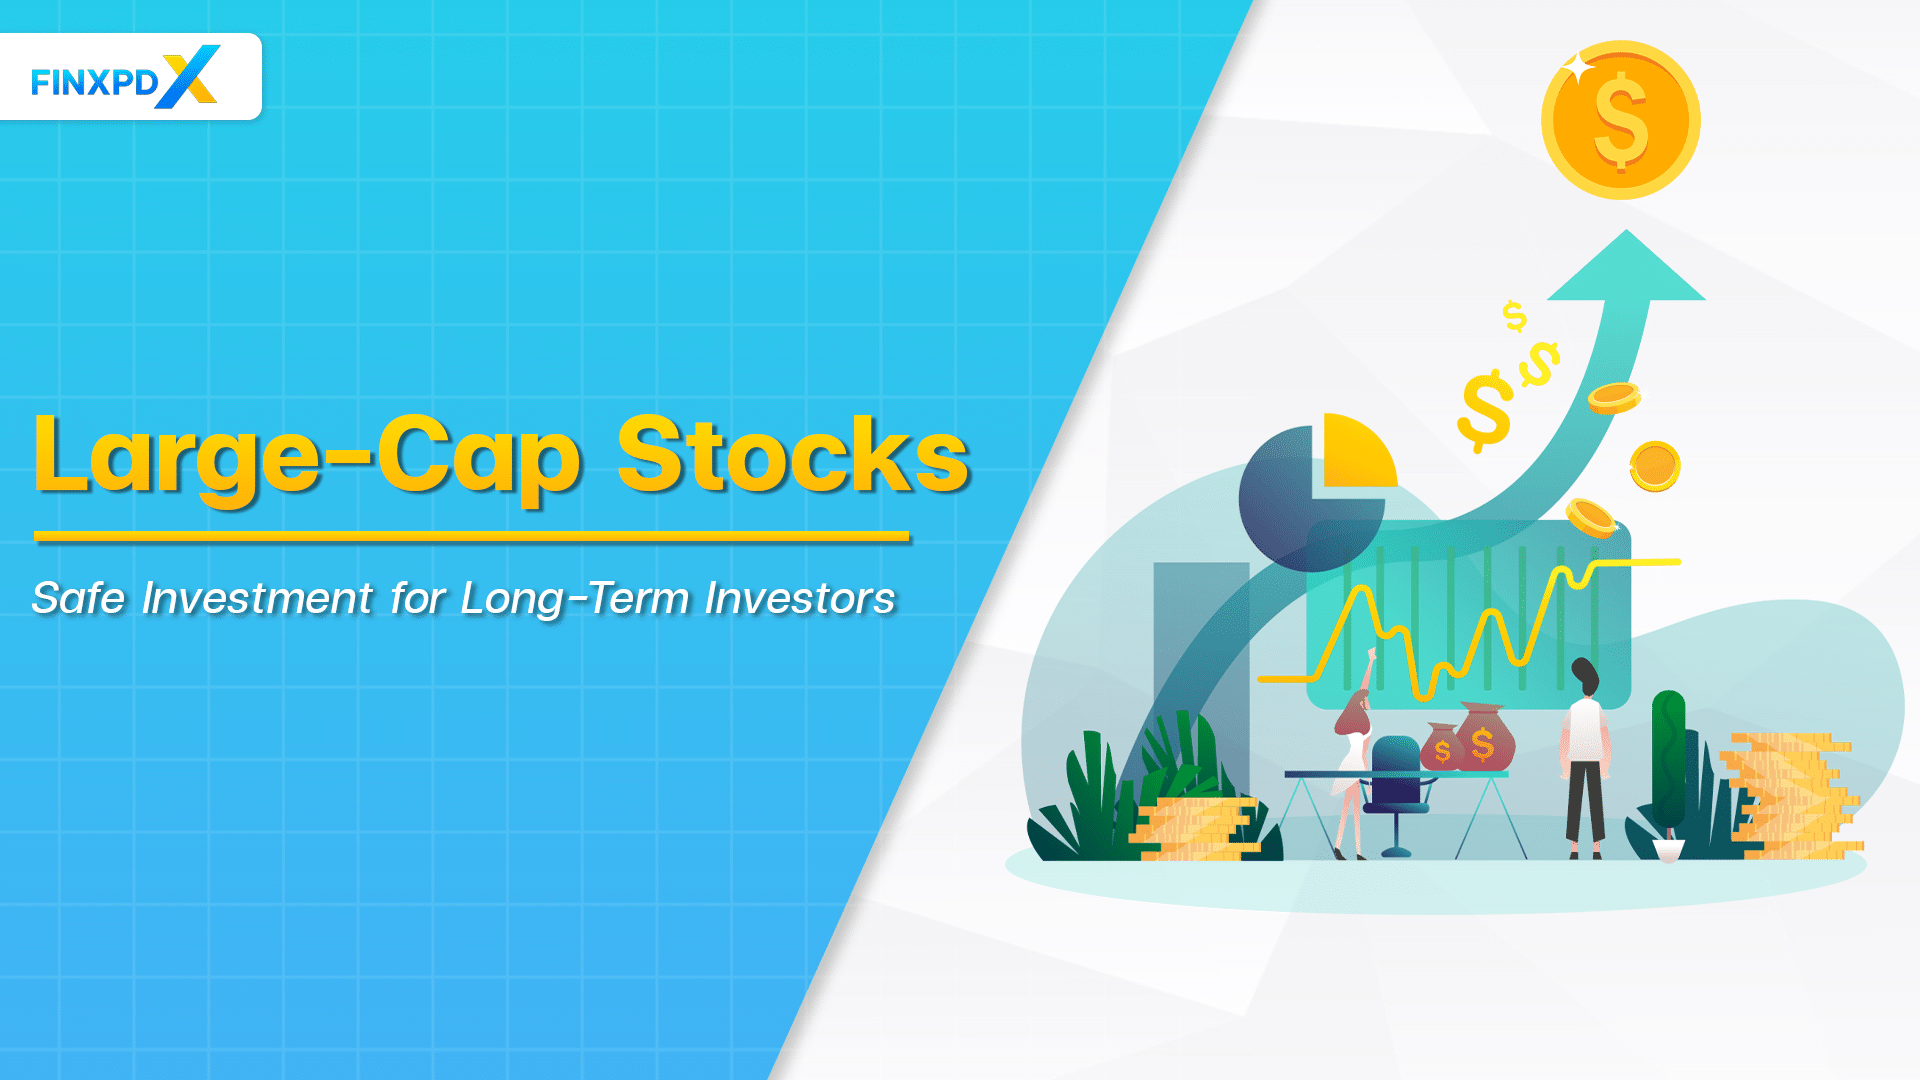 Large-Cap Stocks Safe Investment for Long-Term Investors